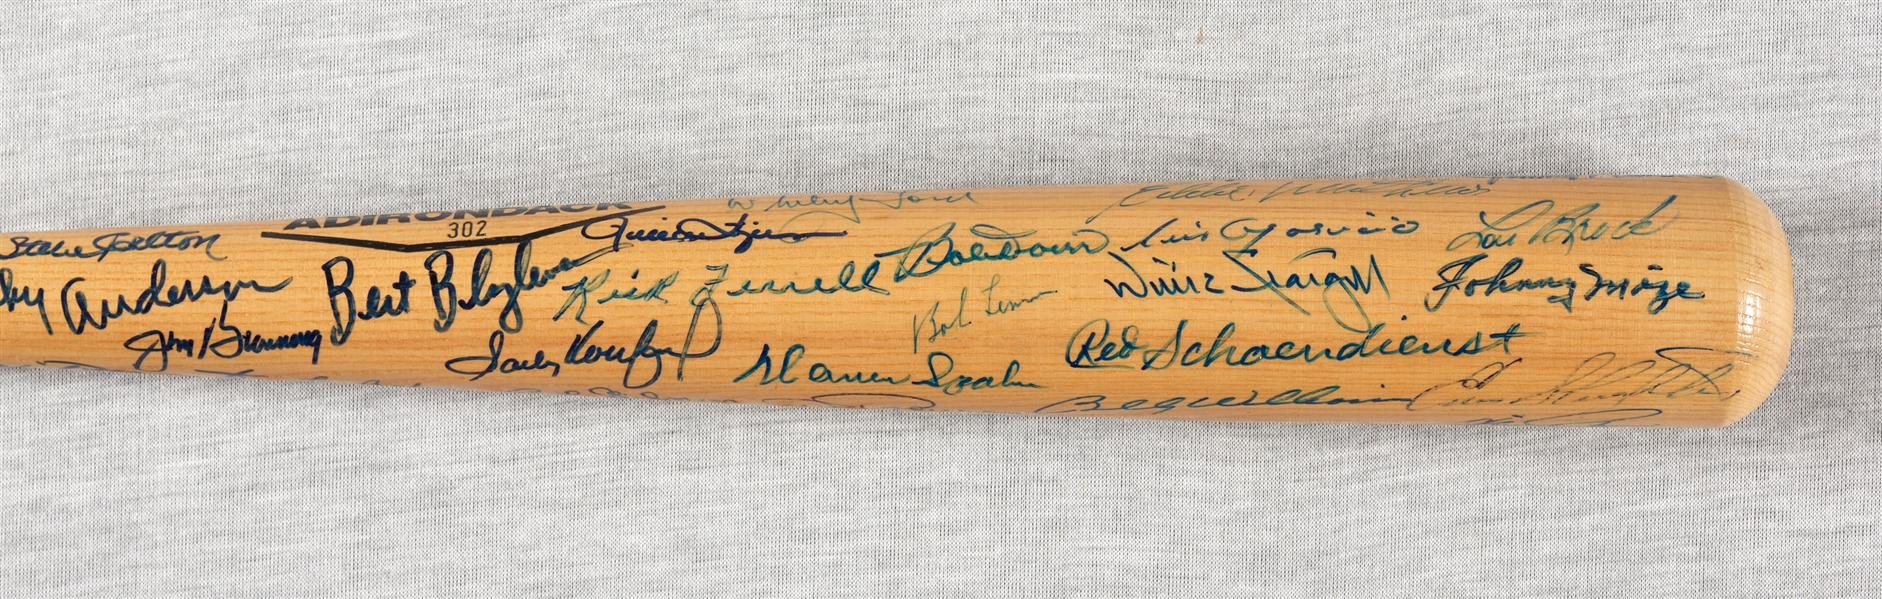 Hall of Famers Multi-Signed Rawlings Bat with Sandy Koufax, Berra, Banks (PSA/DNA)